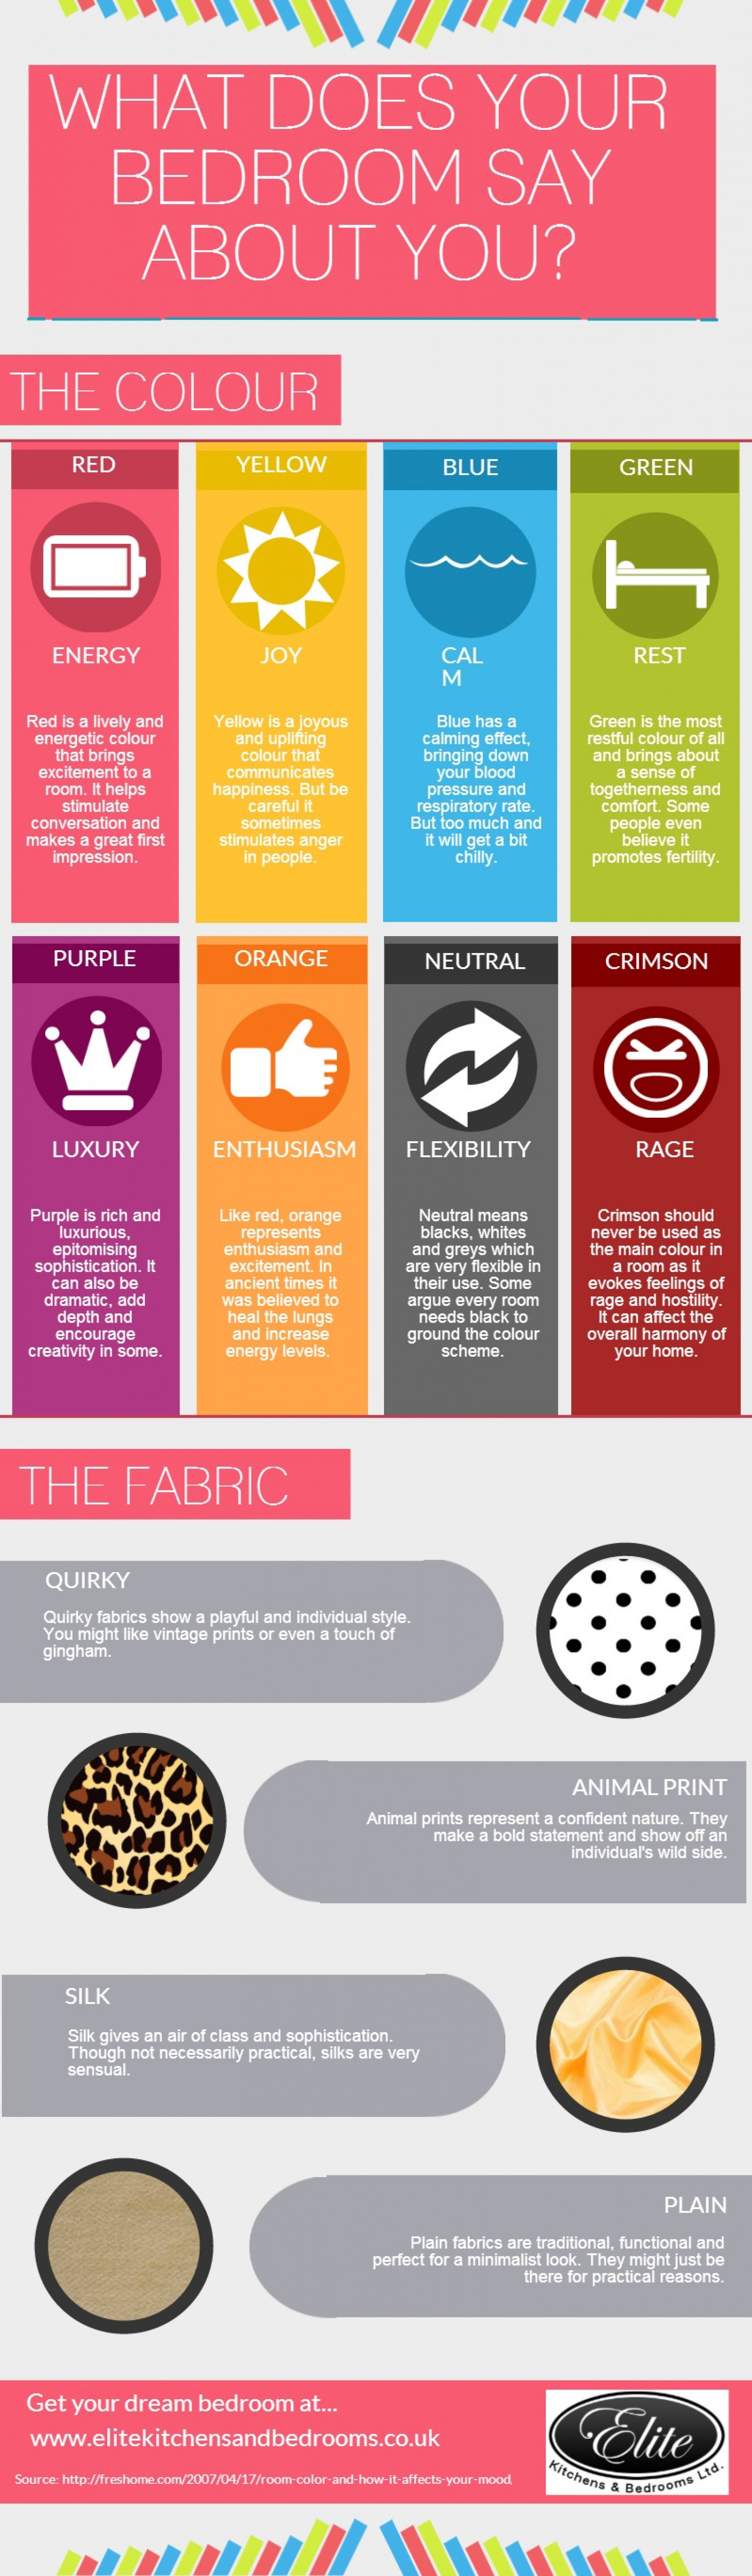 What Does Your Bedroom Say About You? Infographic